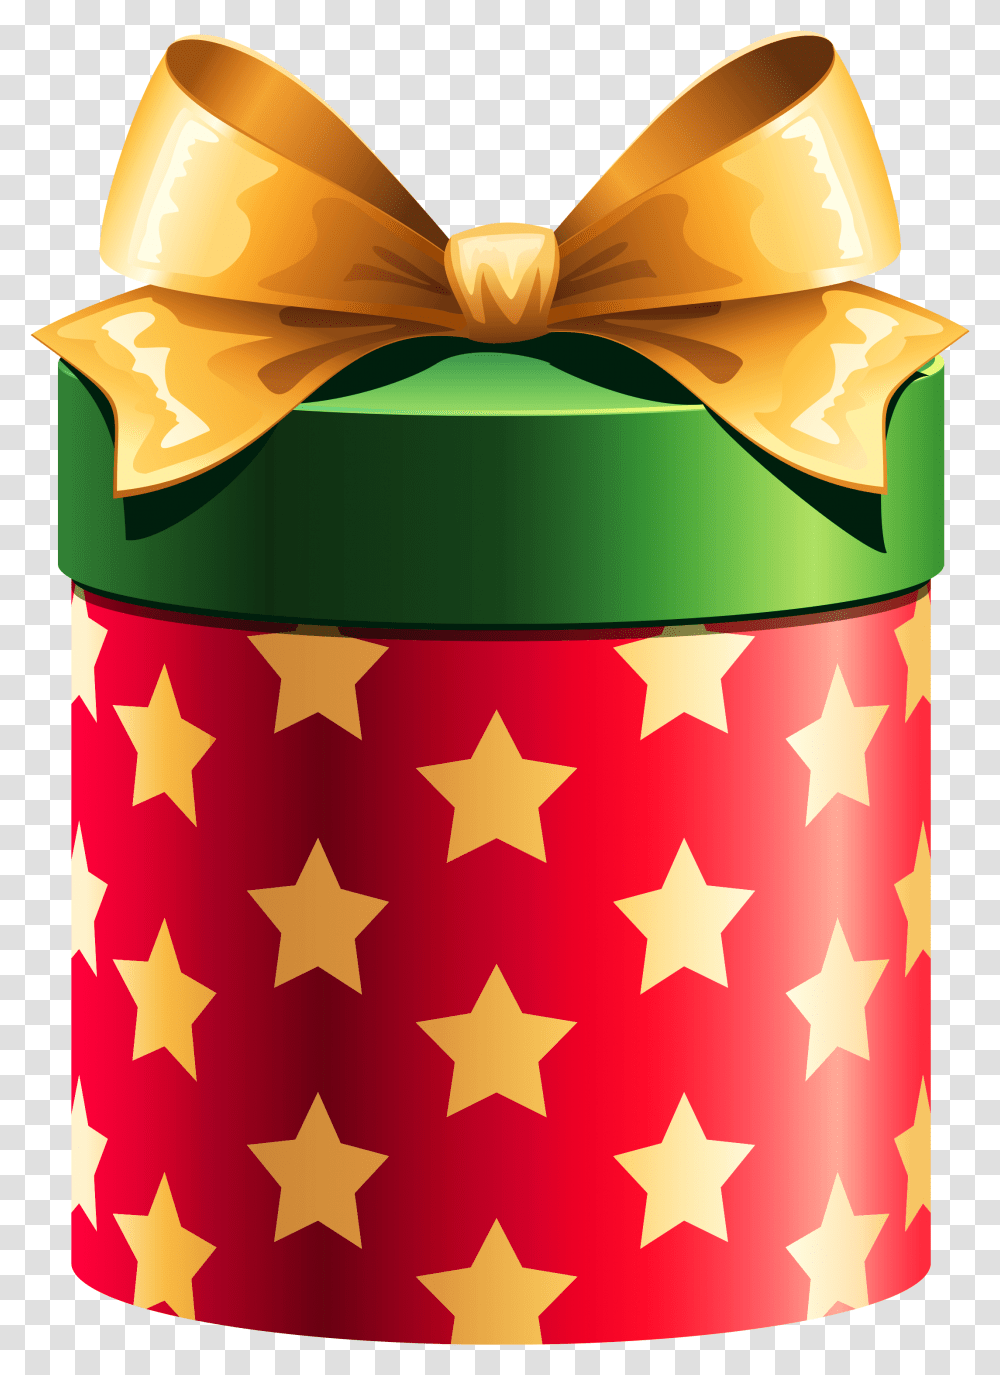 Christmas Present Round Red Gift Box With Gold Stars Christmas Gift Image Clipart, Hardhat, Helmet, Clothing, Apparel Transparent Png